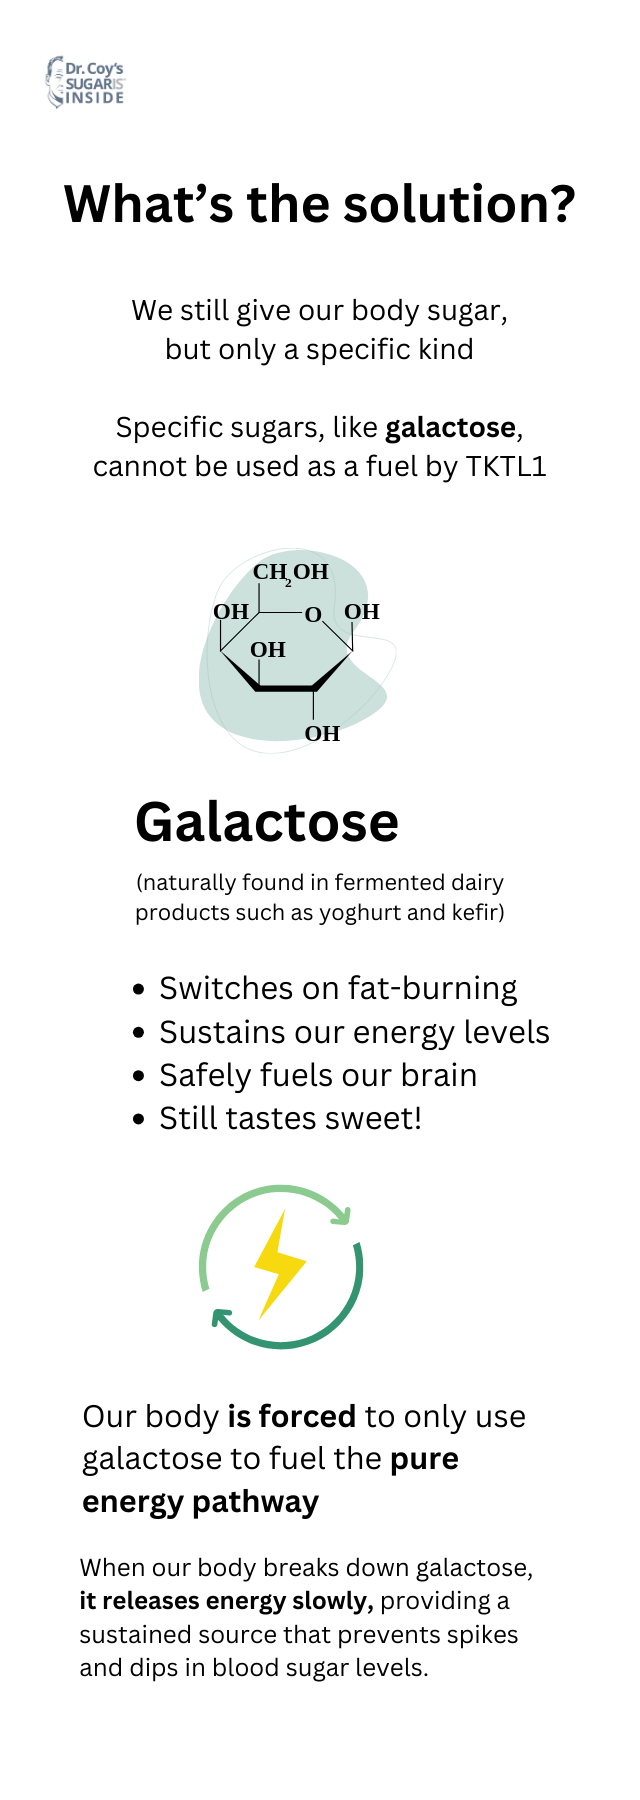 Infographic explaining the solution to an over-active TKTL1 gene is to consume the right kind of sugar, such as galactose which can be broken down into glucose and not used as fuel by TKTL1